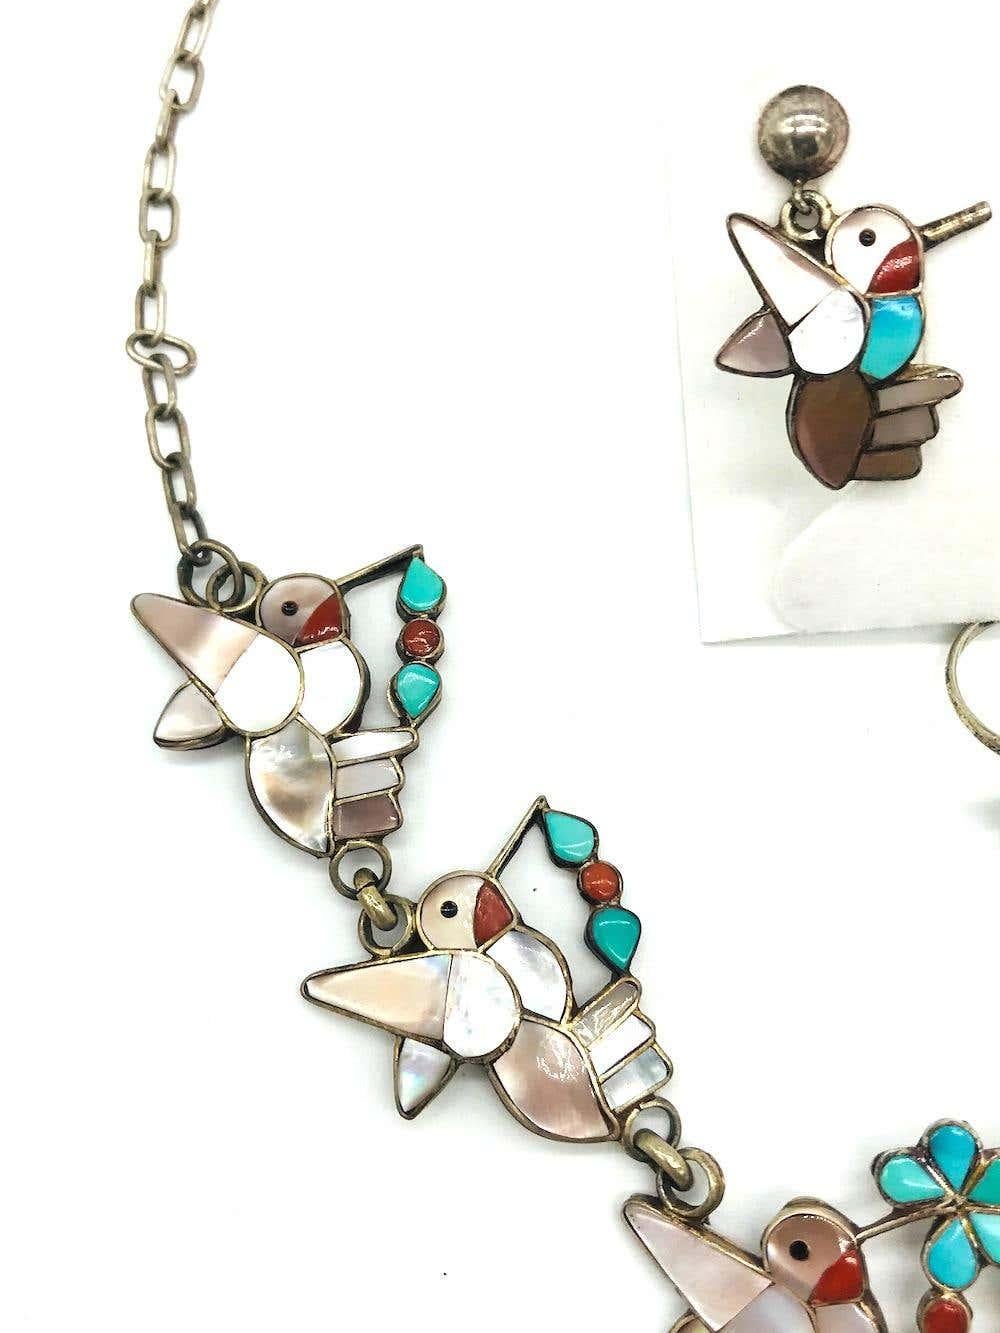 3- Piece set of Hummingbirds
Intrigue detailed birds set in carved turquoise and mother of pearl. The base is sterling silver, 925. The necklace is 18 inches in length.
Earrings are 1 inch in length and made for pierced ears.
Ring is a size 7
Total